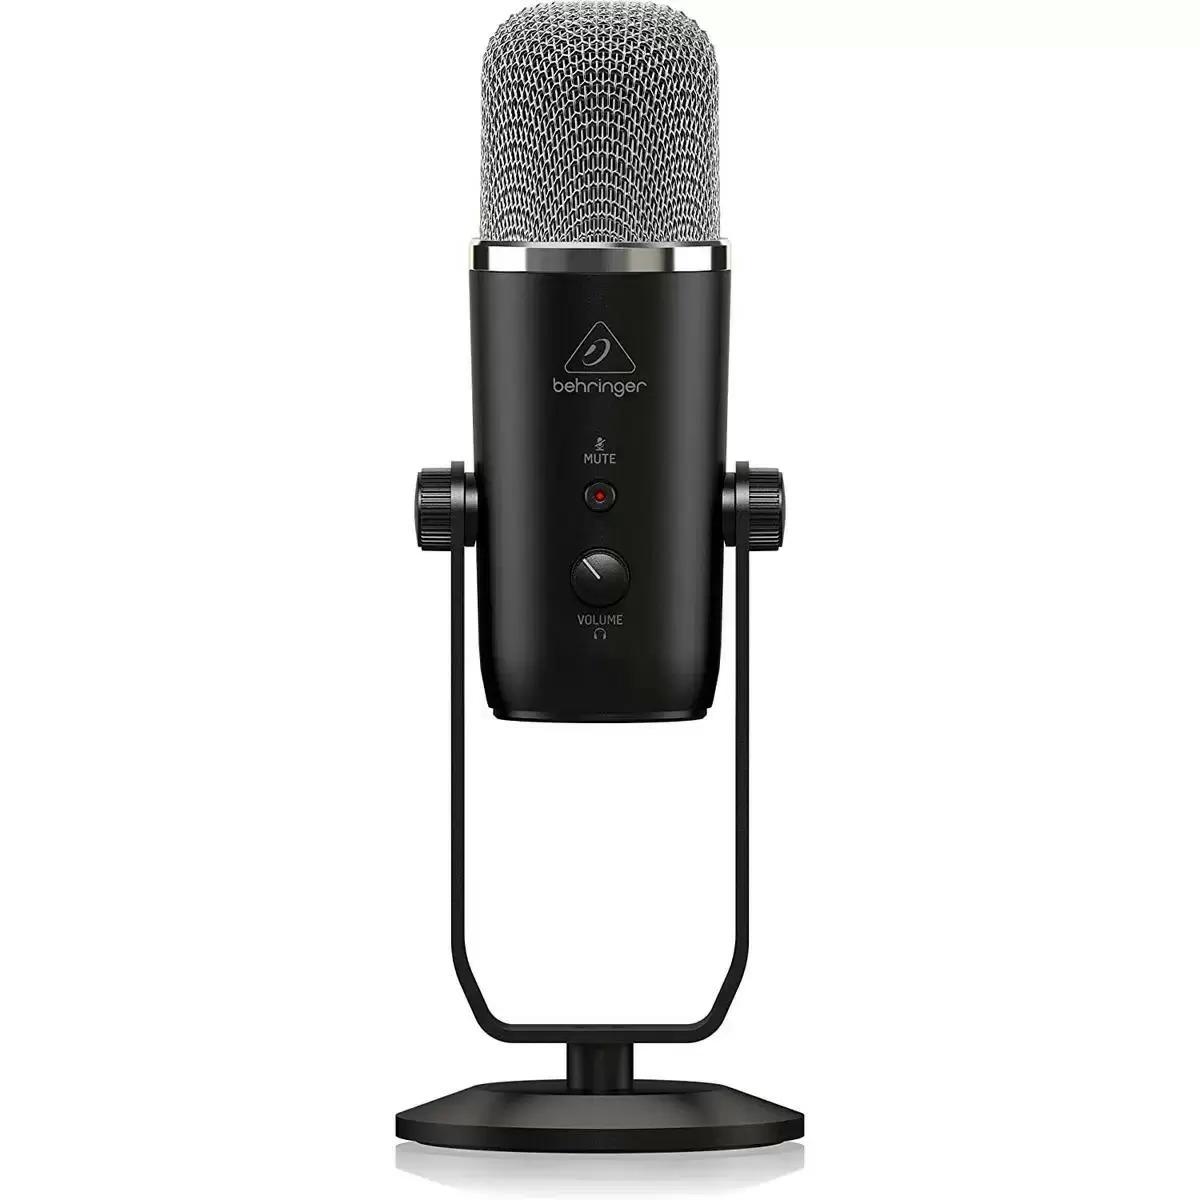 Behringer BIGFOOT All-In-One USB Studio Condenser Microphone for $27.96 Shipped